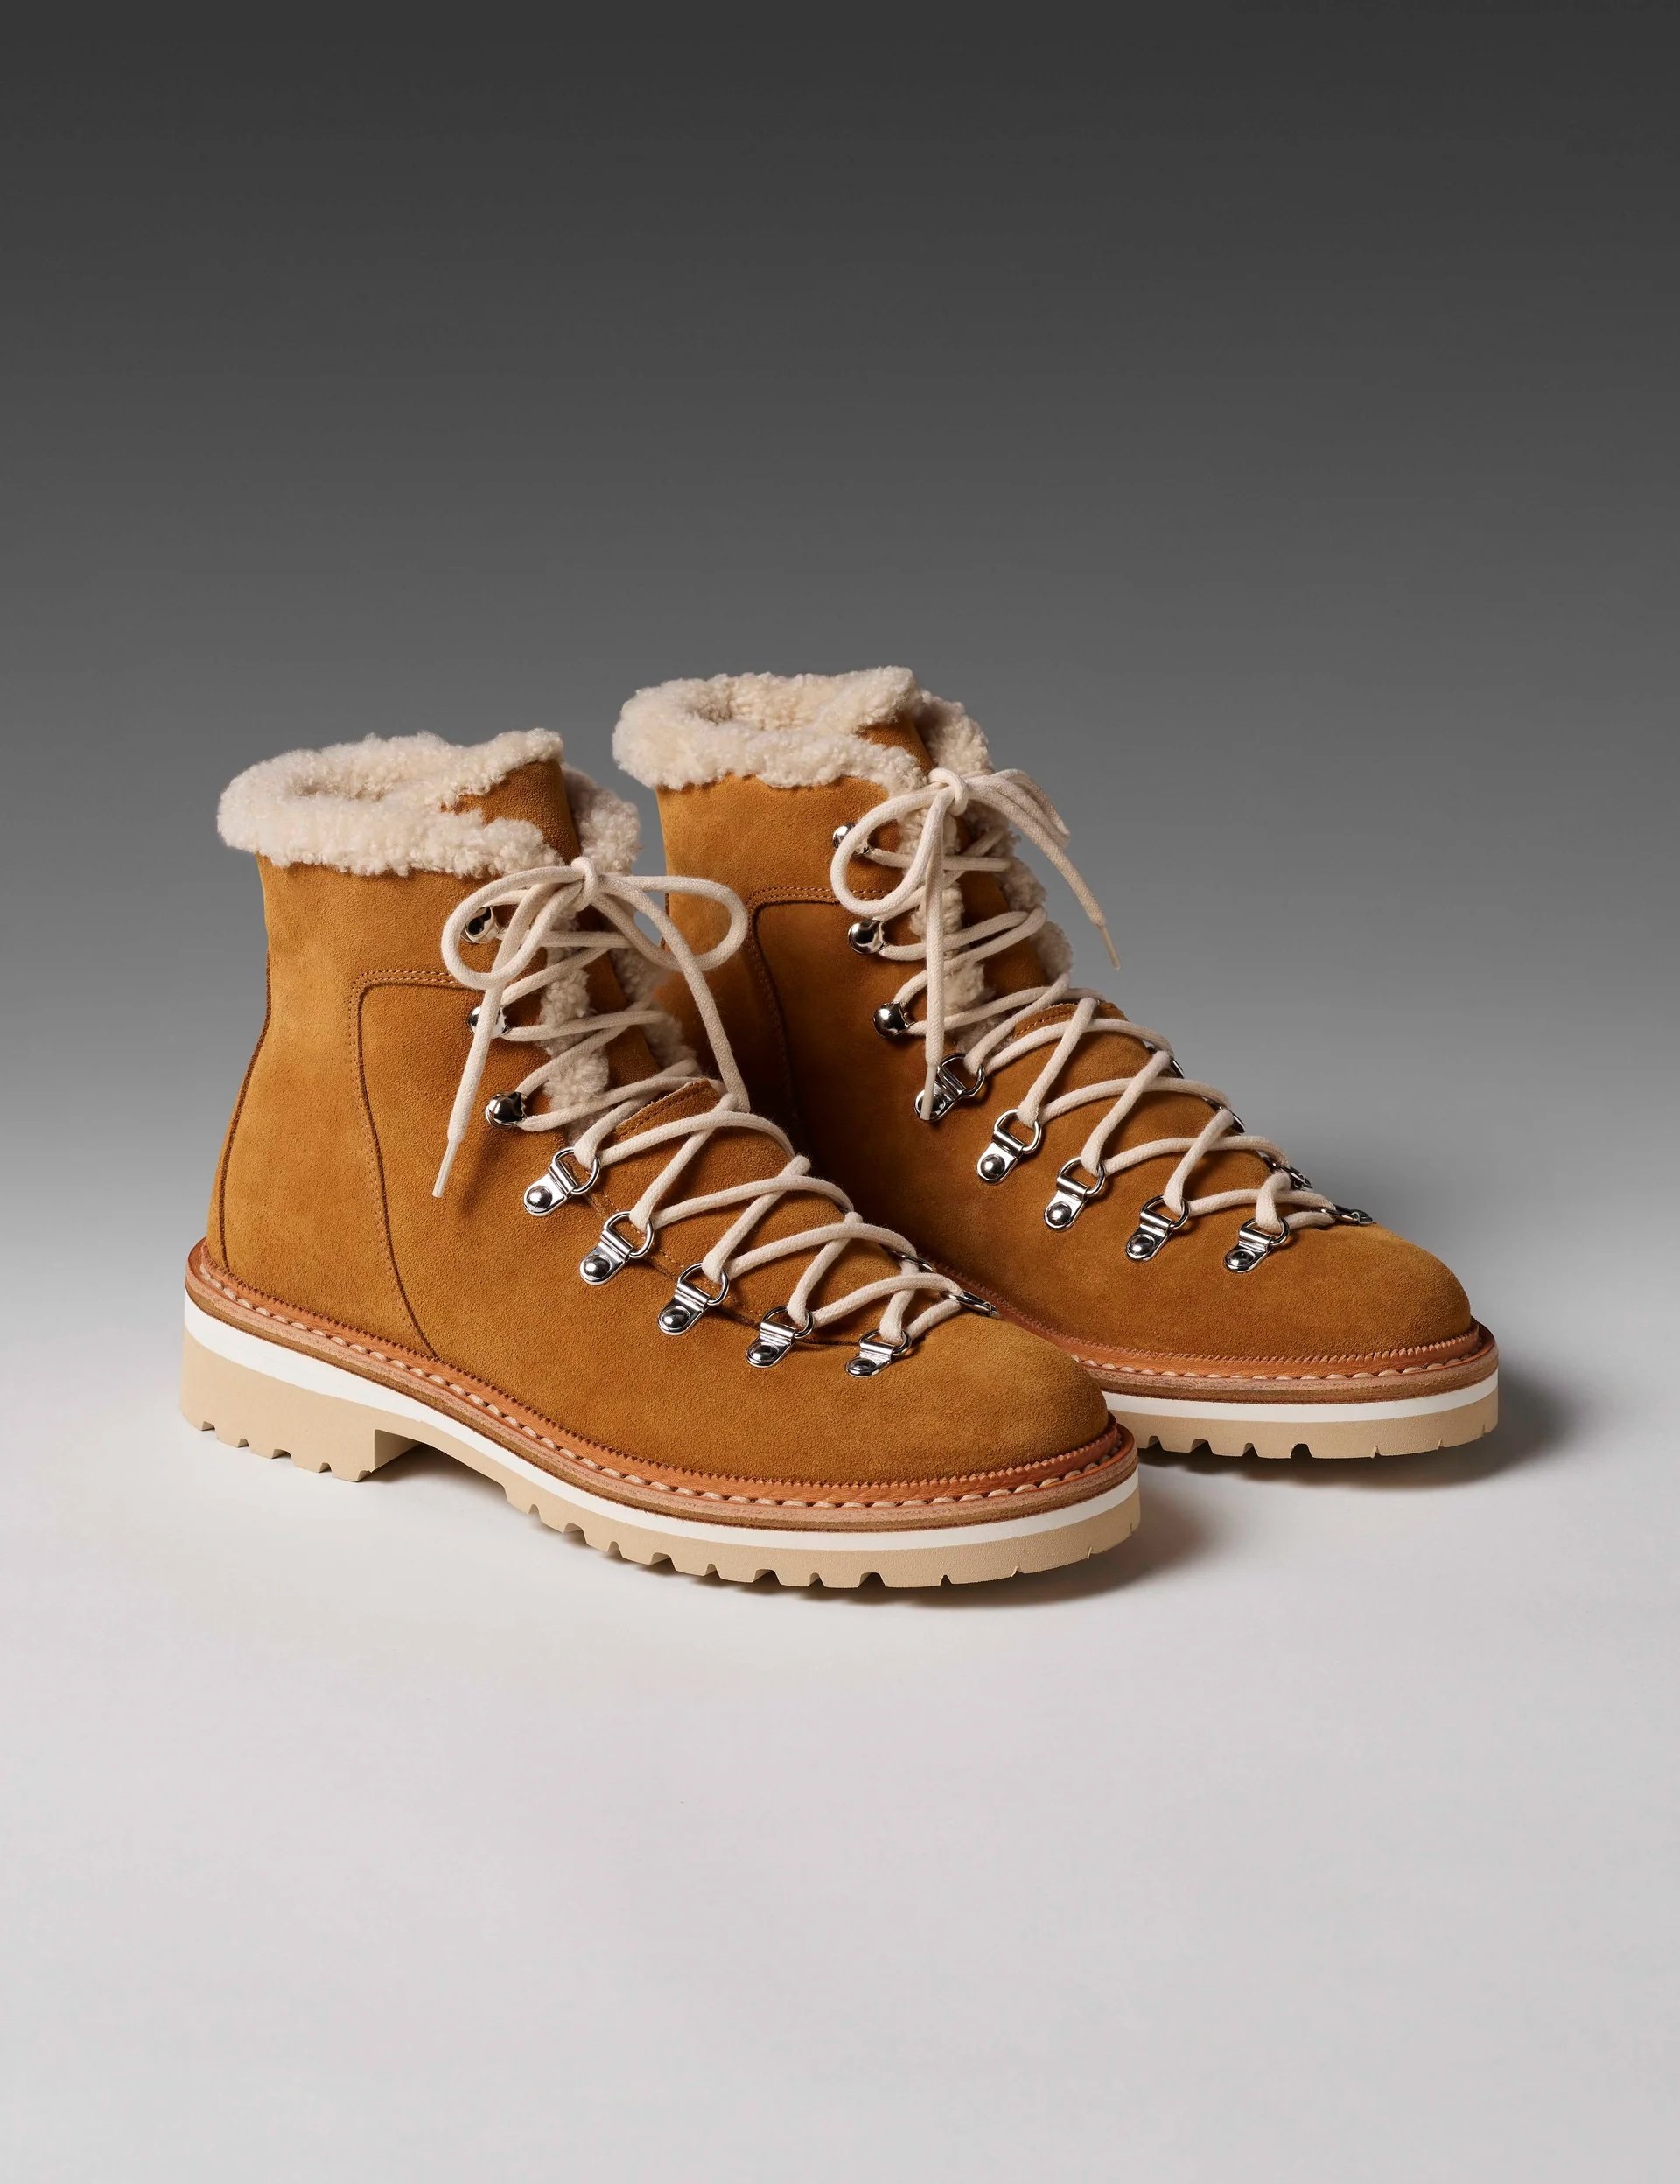 Hiking Boot with Shearling, $495